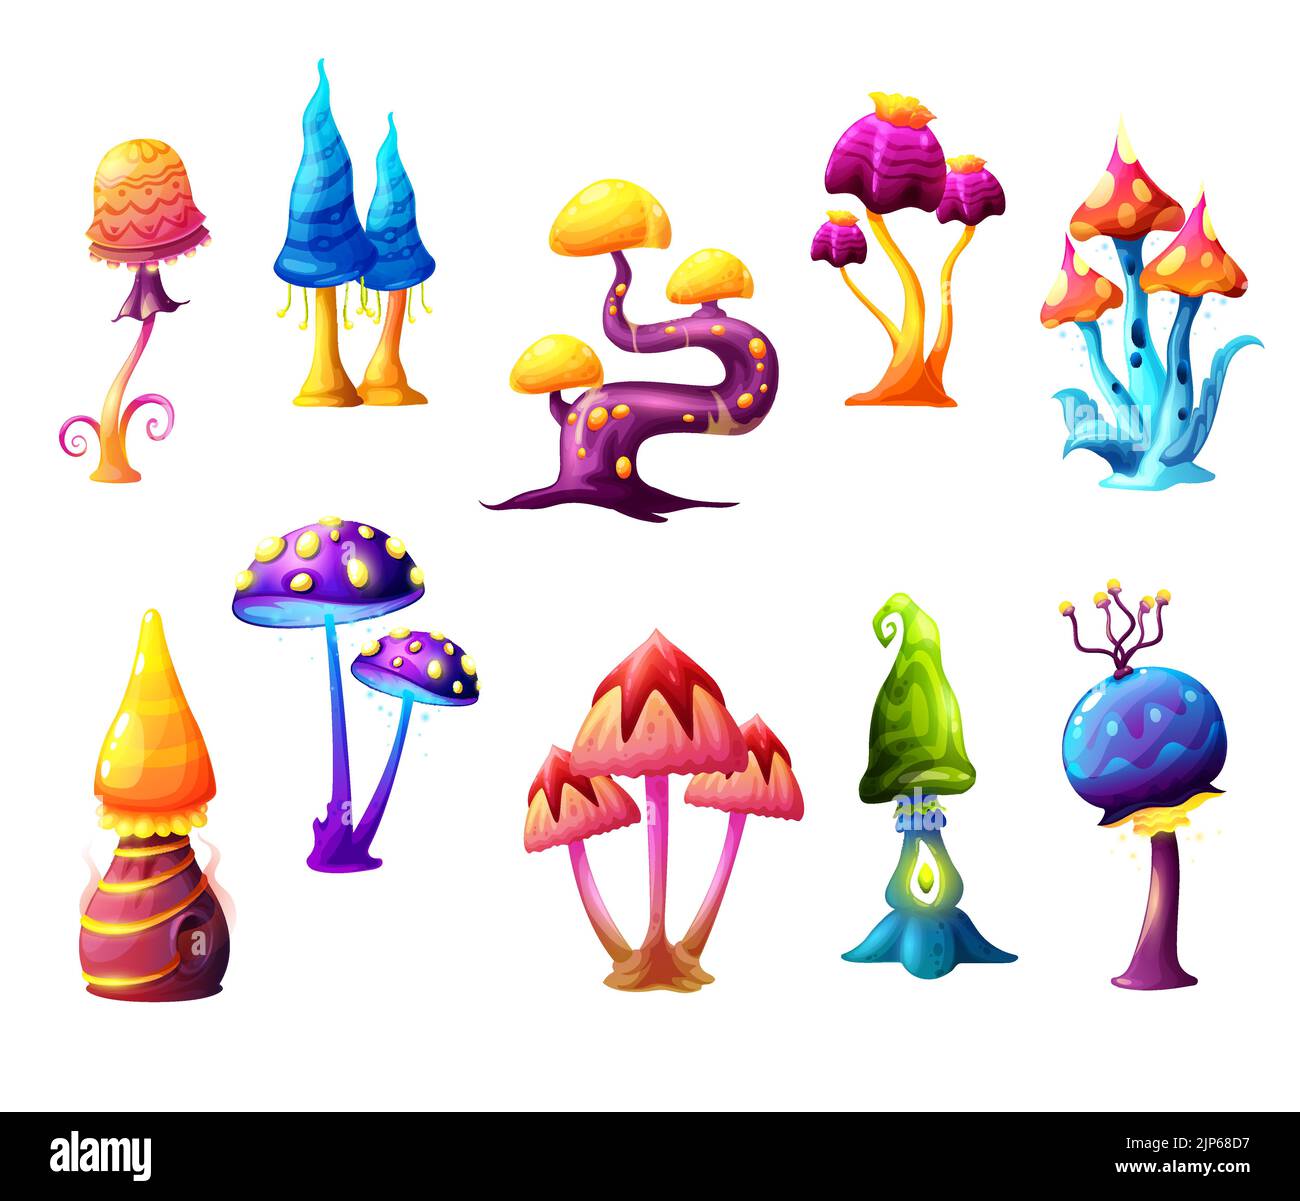 Fairy fantasy cartoon mushrooms, vector magic fungi of unusual shapes with bizarre stipes and odd caps. Natural elements for fairytale or computer game interface. Beautiful strange alien plants set Stock Vector